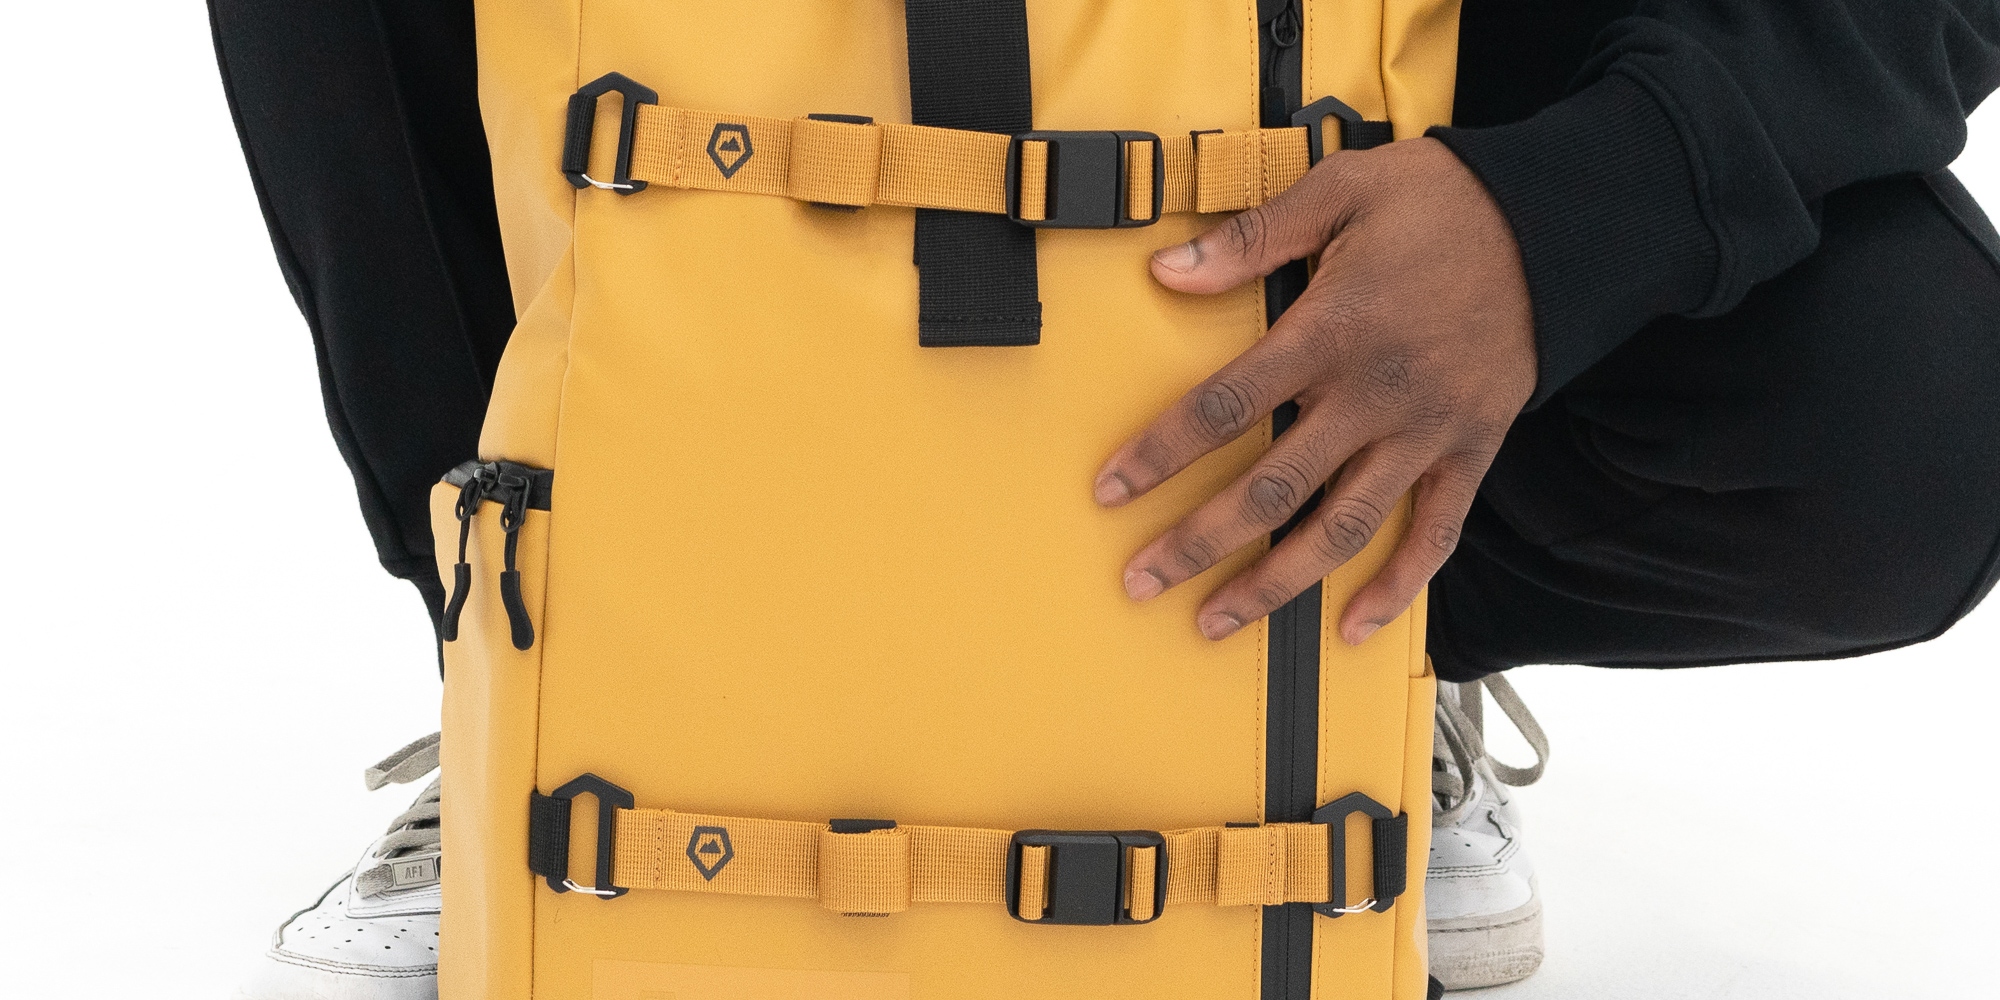 Wandrd Trouser Straps for Accessories - Yellow - Expand the Possibilities of Wandrd Backpacks